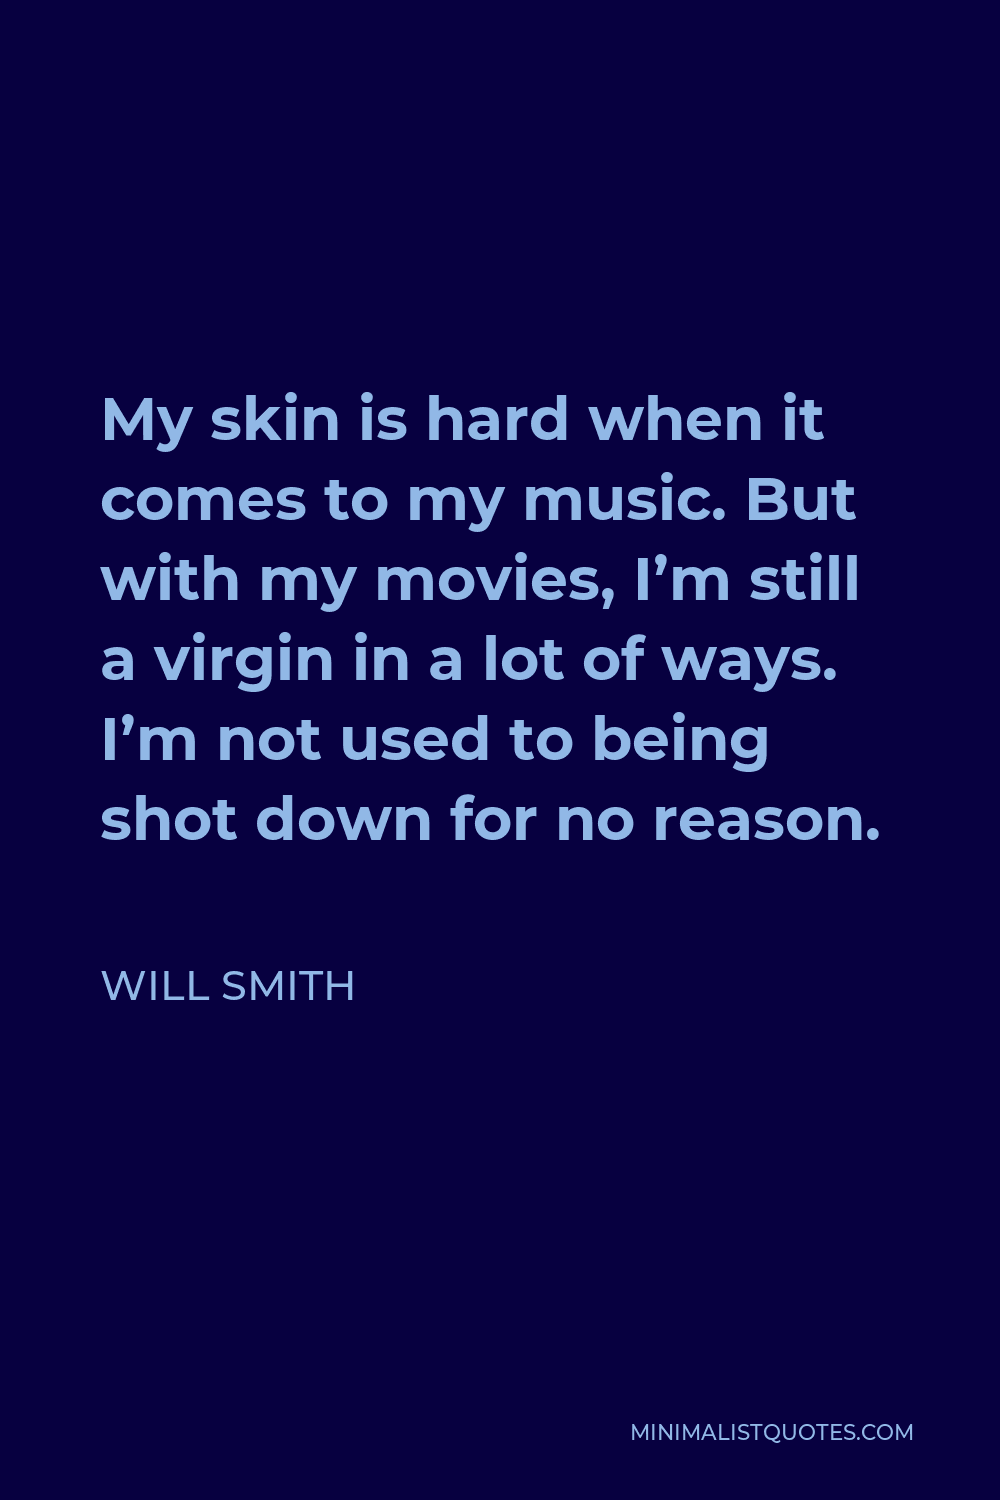 Will Smith Quote - My skin is hard when it comes to my music. But with my movies, I’m still a virgin in a lot of ways. I’m not used to being shot down for no reason.